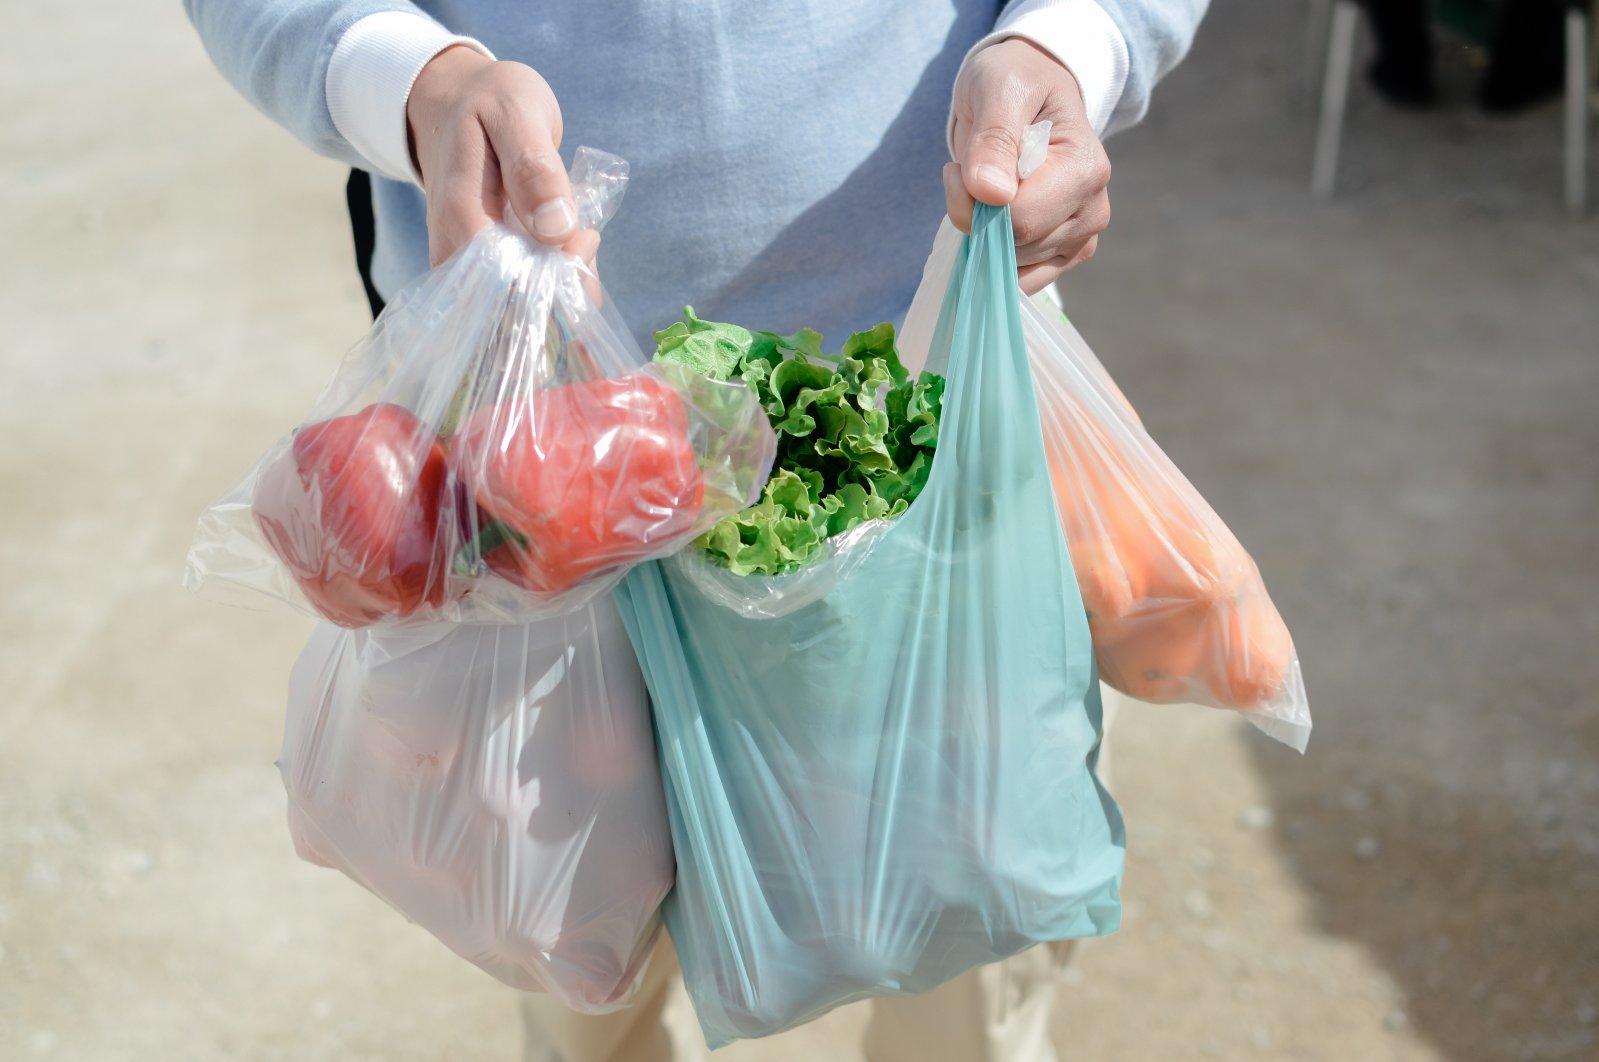 The use of plastic bags started in the 1900s. They are manufactured in approximately 15 minutes but take 1,000 years to break down in nature. (Shutterstock Photo)